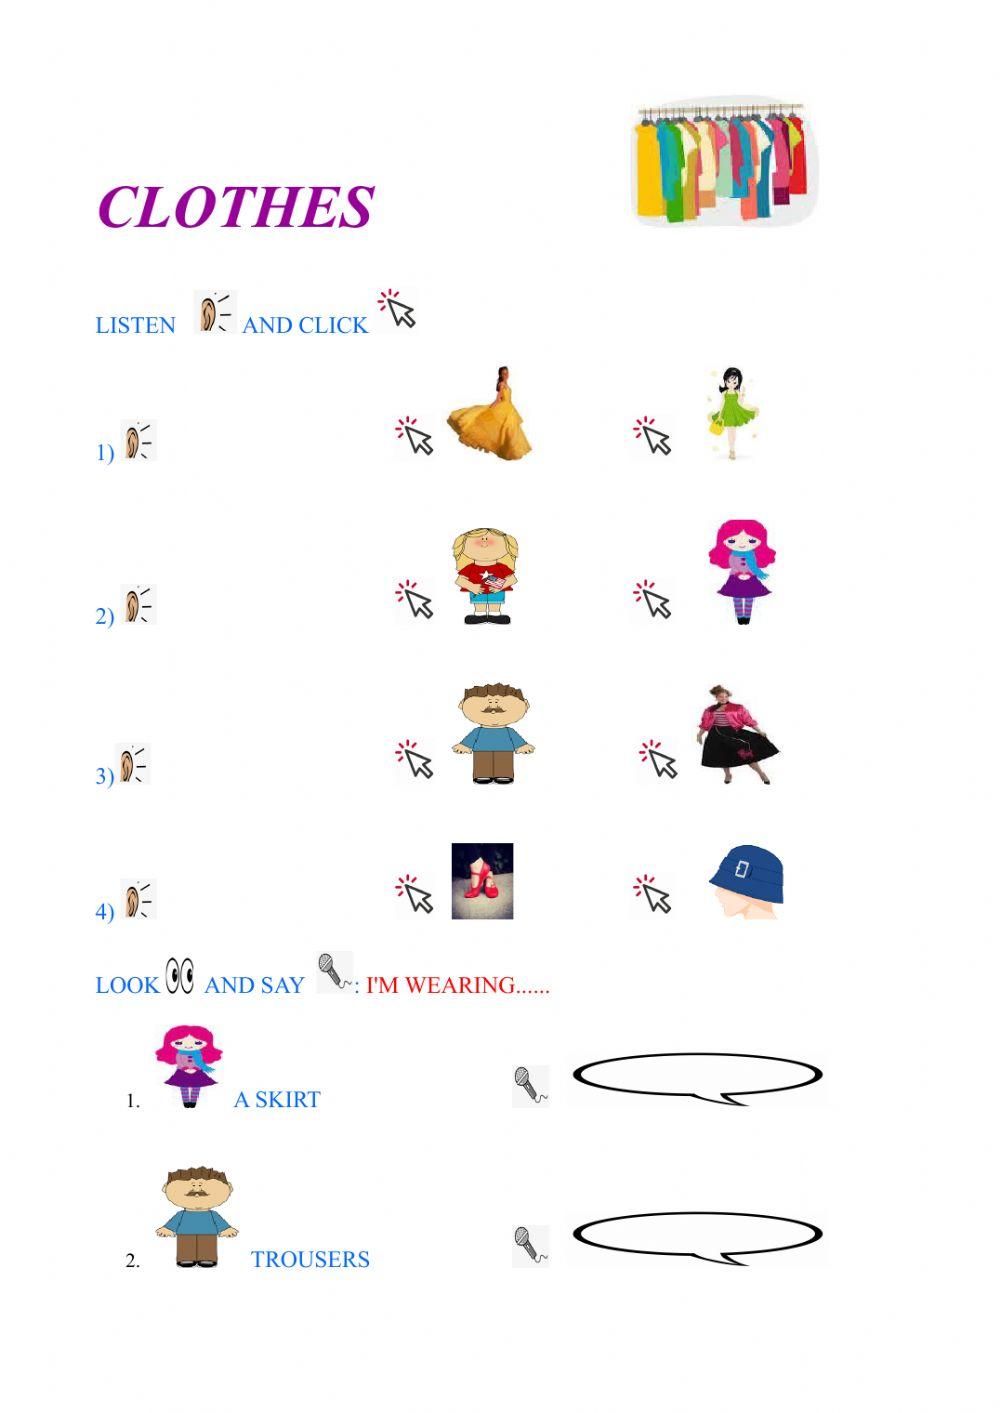 Clothes online exercise for grade 2